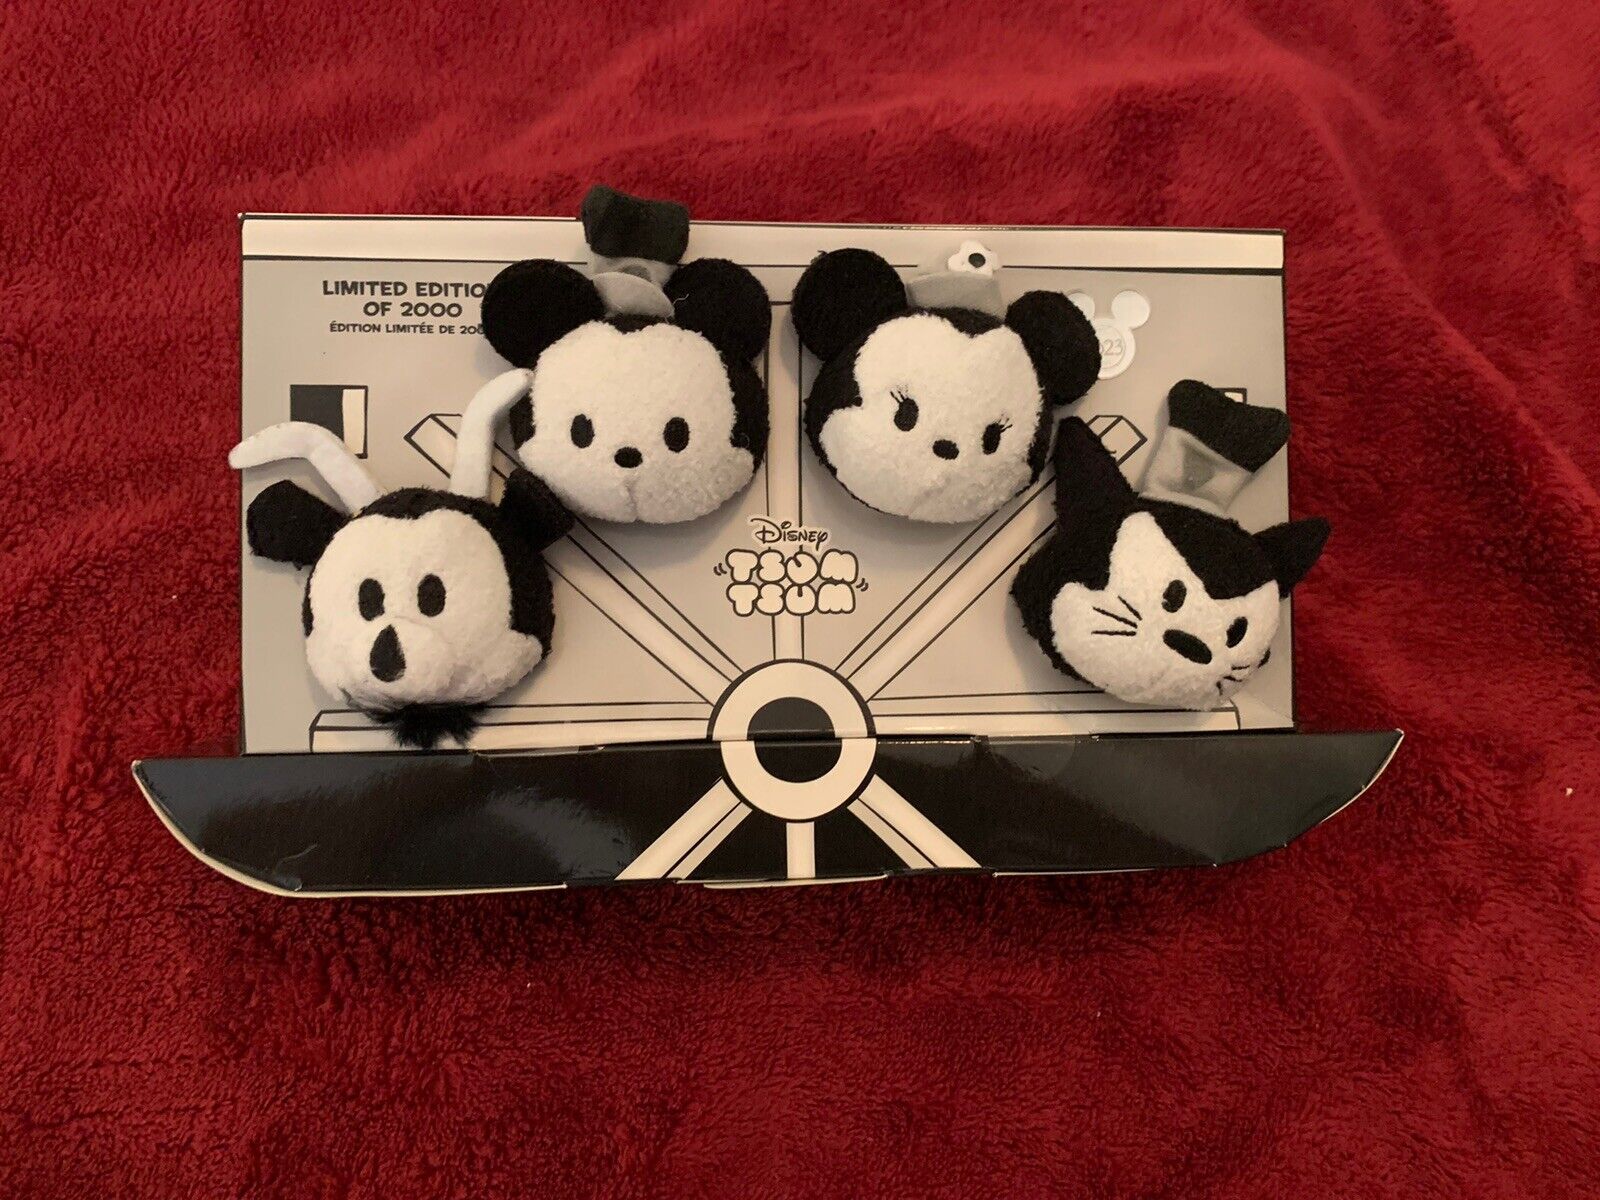 Disney D23 EXPO 2015 Micky Mouse TSUM TSUM Plush Steamboat Willie Set